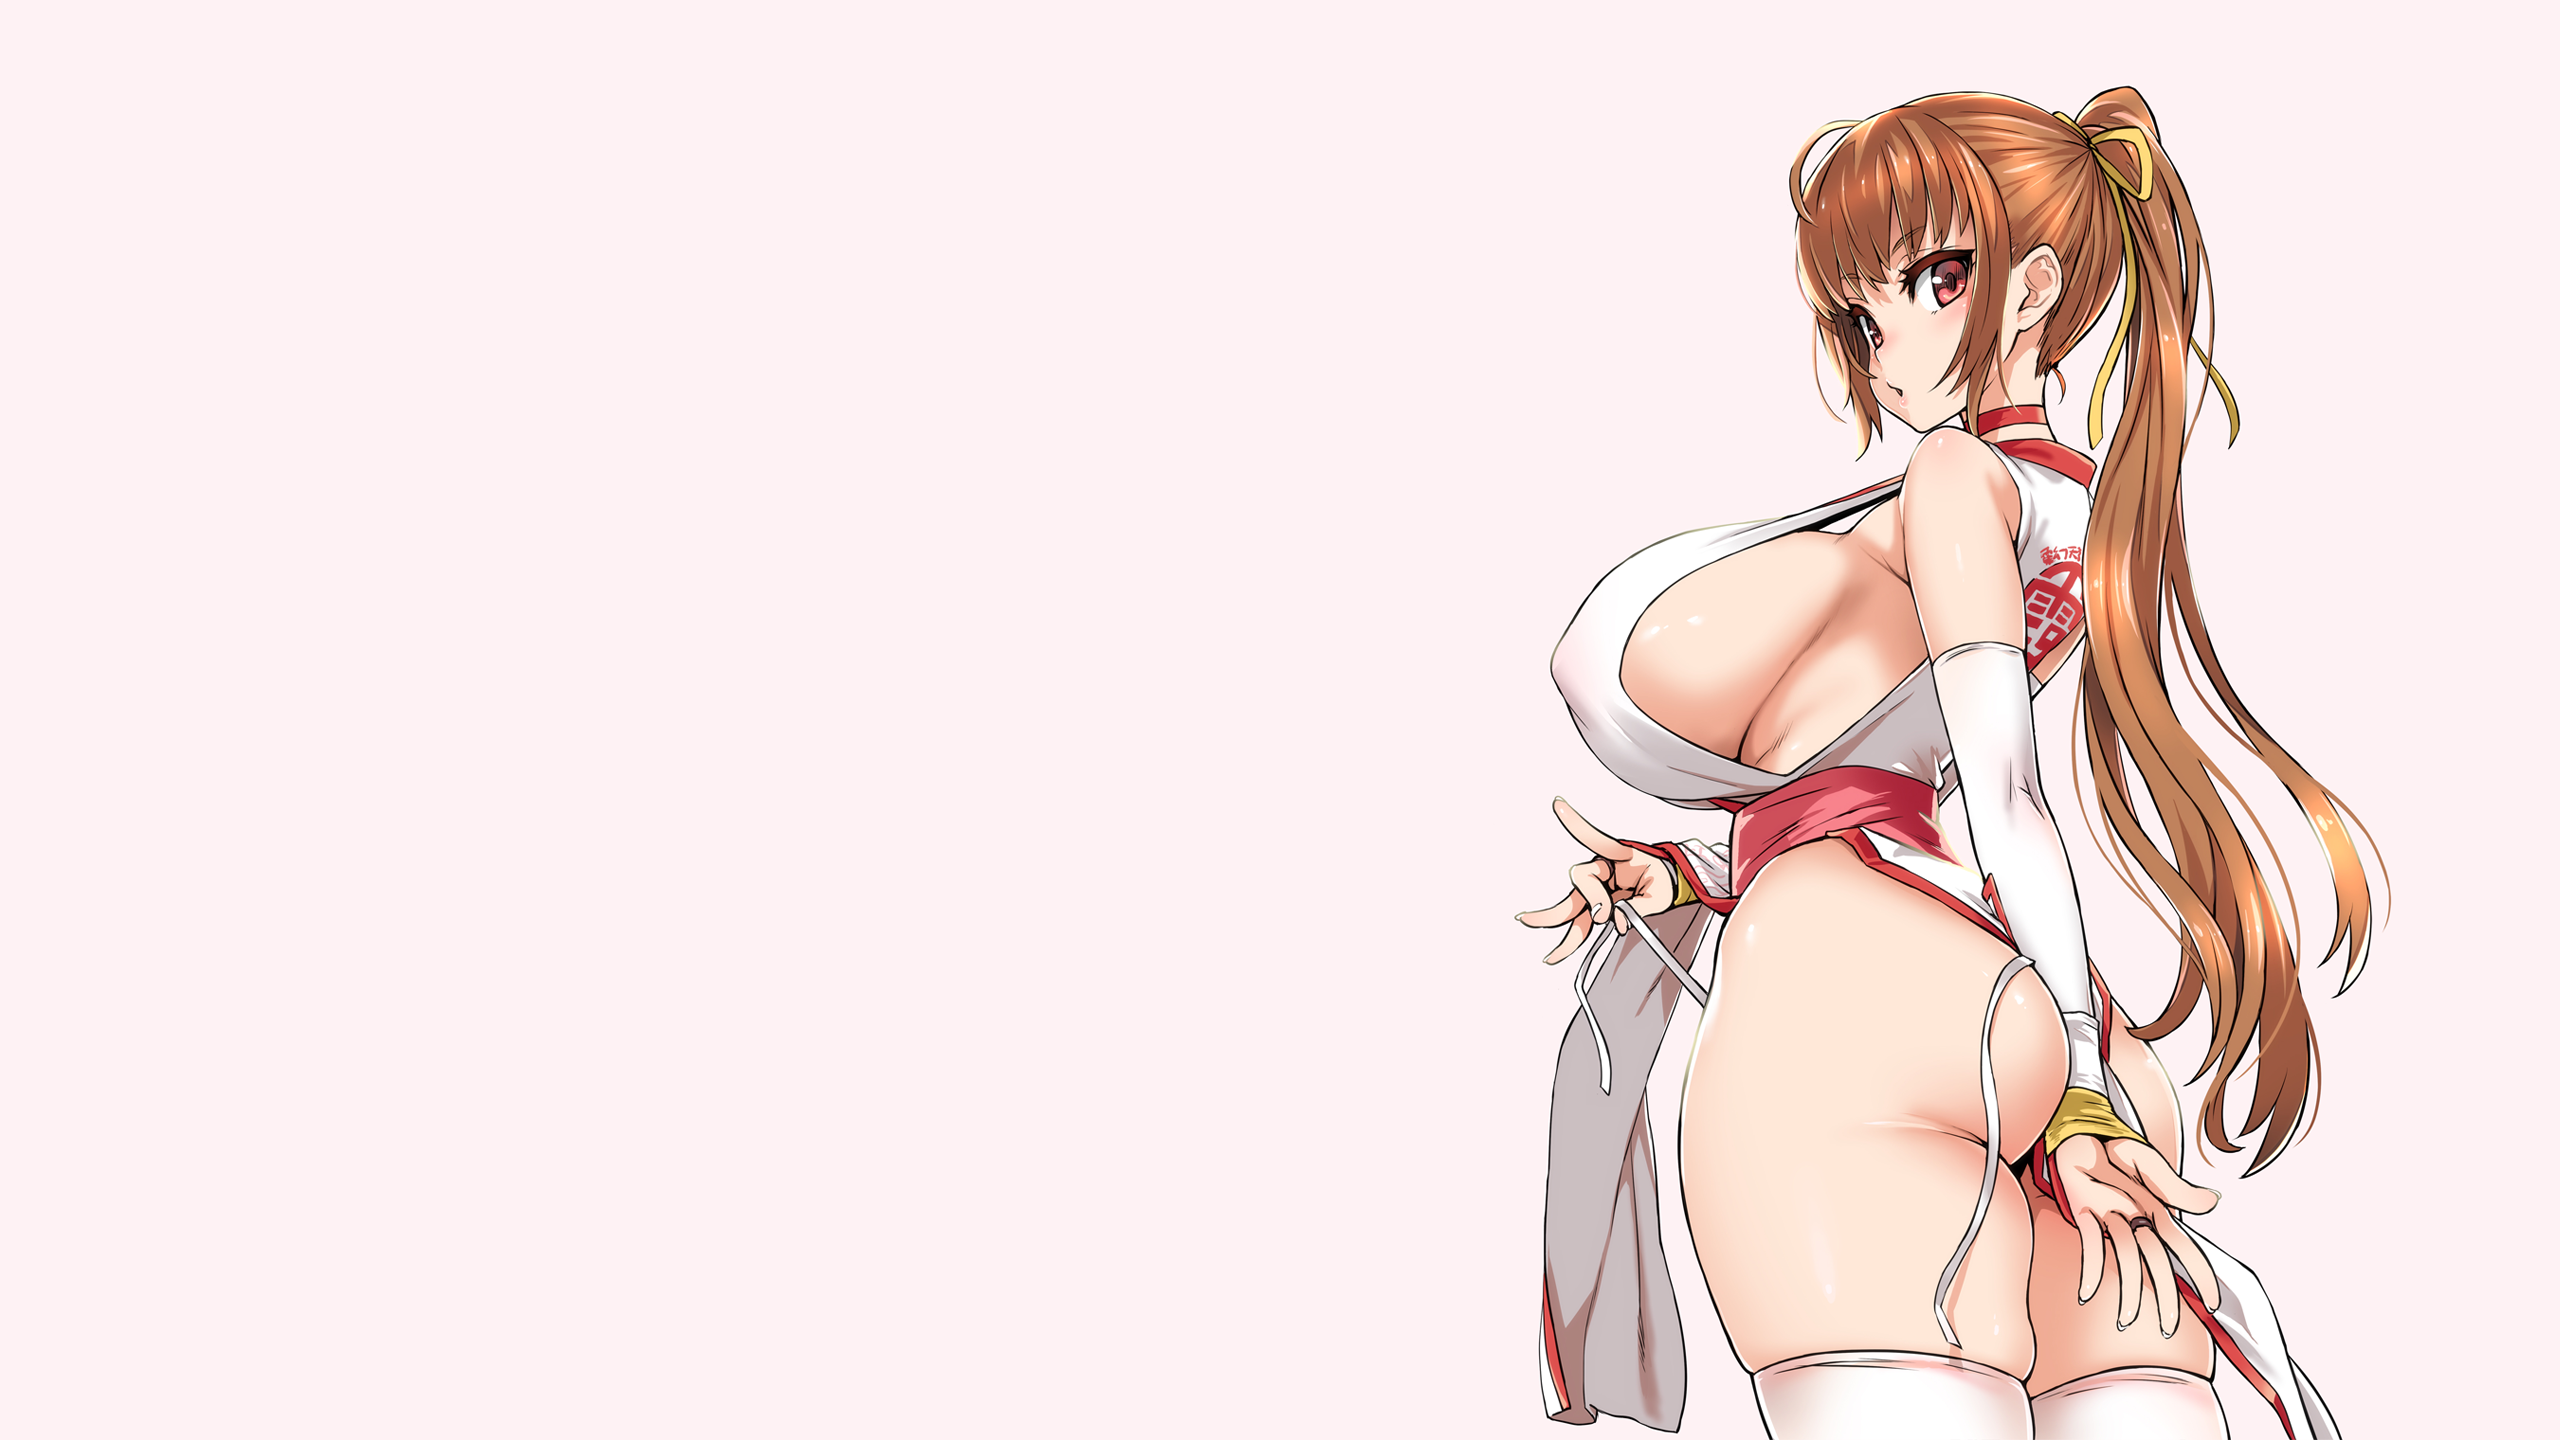 Anime 2560x1440 anime anime girls simple background ecchi Dead or Alive Kasumi (Dead or Alive) boobs big boobs no bra thighs thick thigh ass thick ass Japanese clothes ninja girl shinobi sideboob ponytail stockings thigh-highs white stockings white legwear Asanagi huge breasts